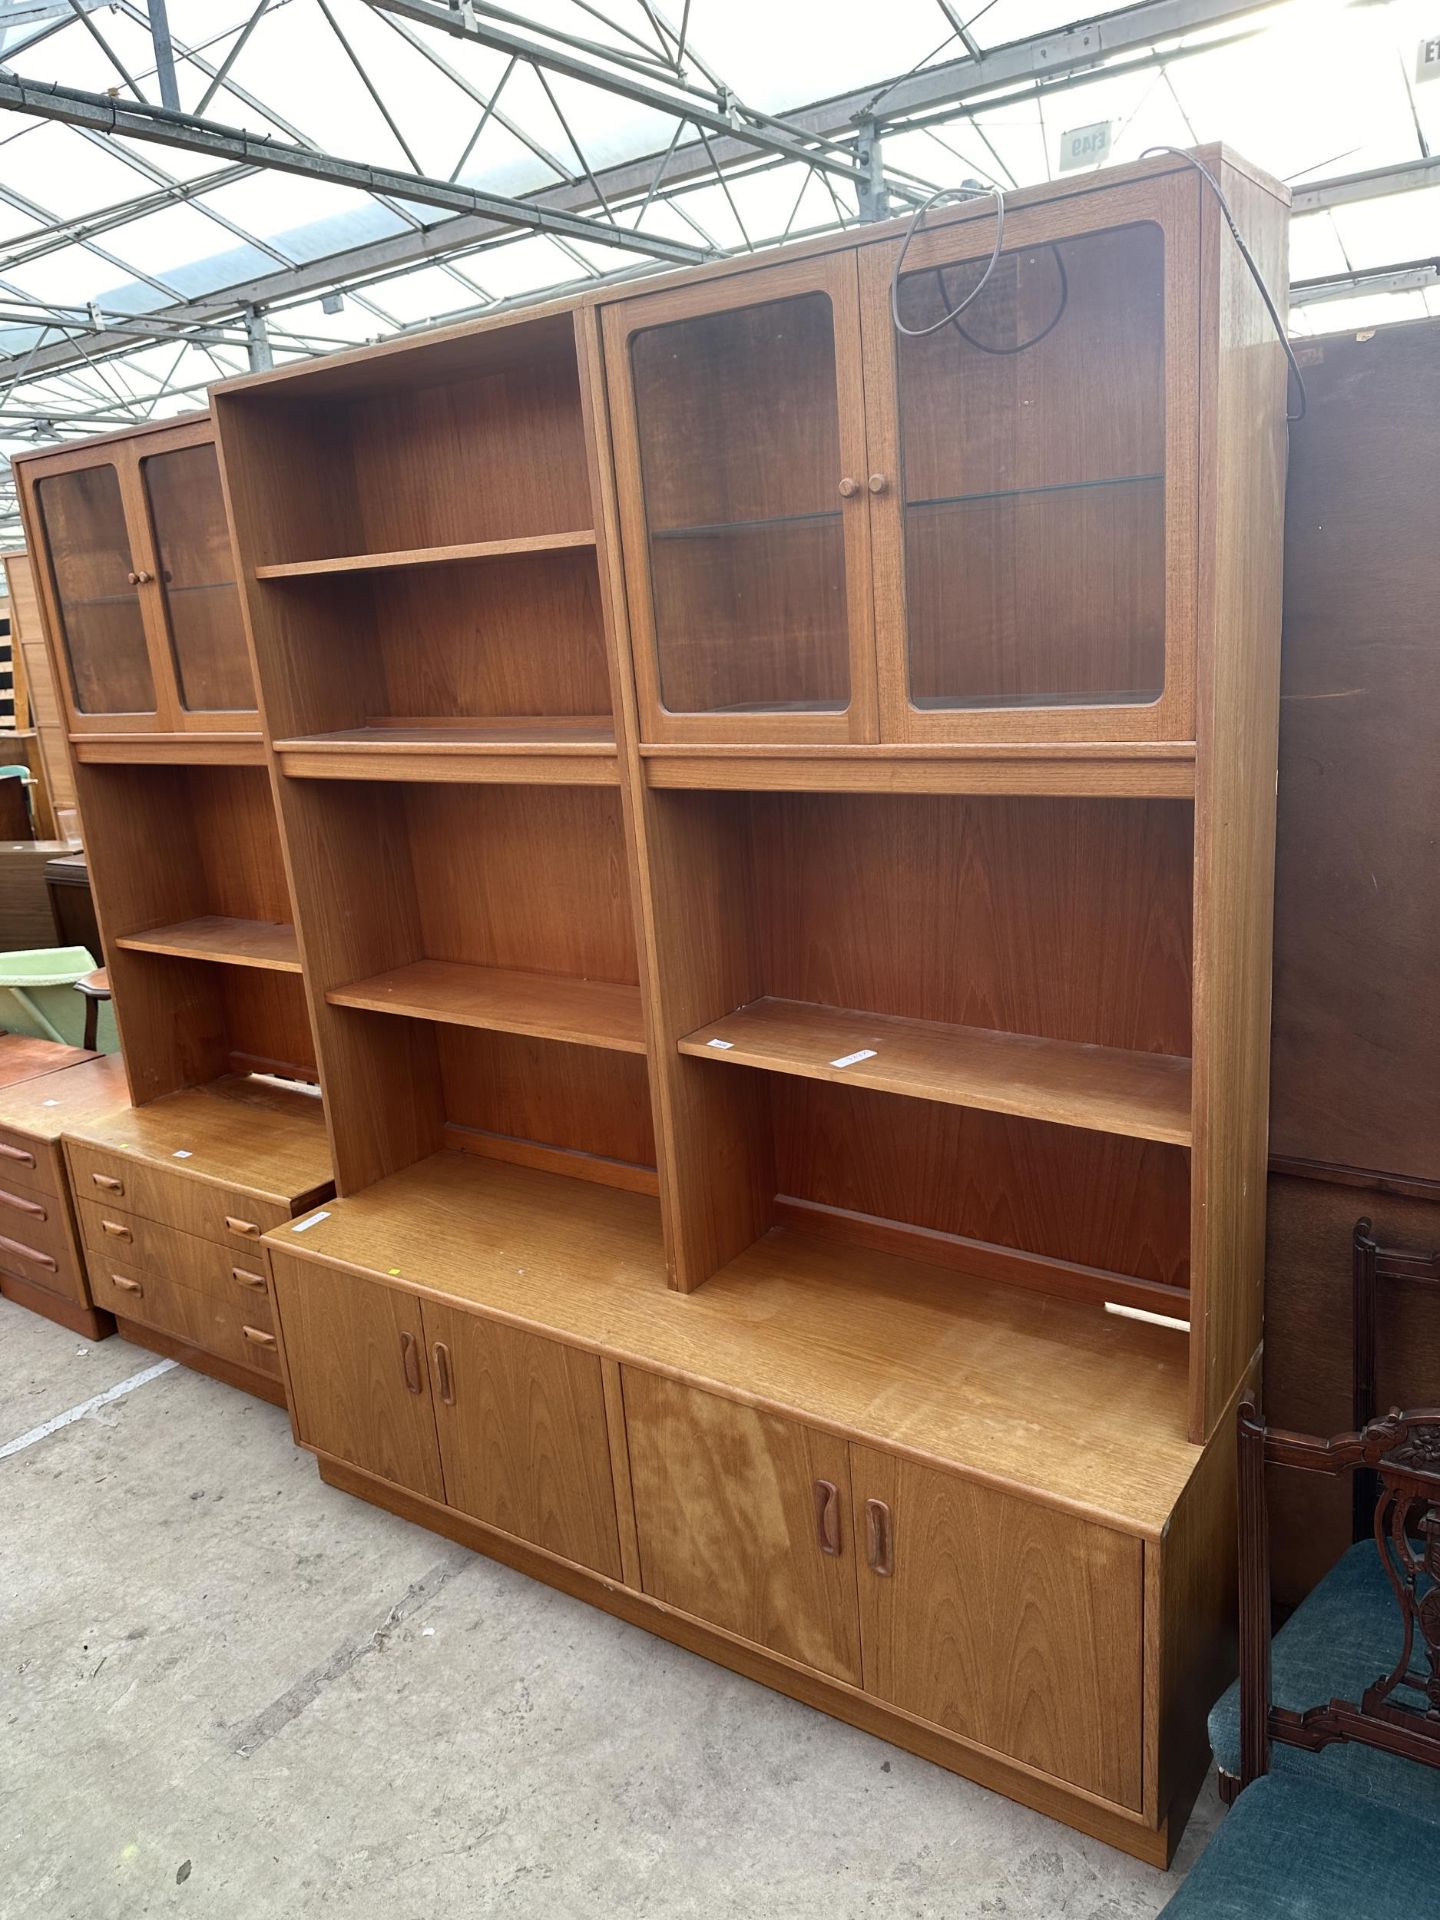 A G PLAN RETRO TEAK UNIT WITH TWO GLAZED UPPER DOORS AND DRAWERS TO BASE 64" WIDE